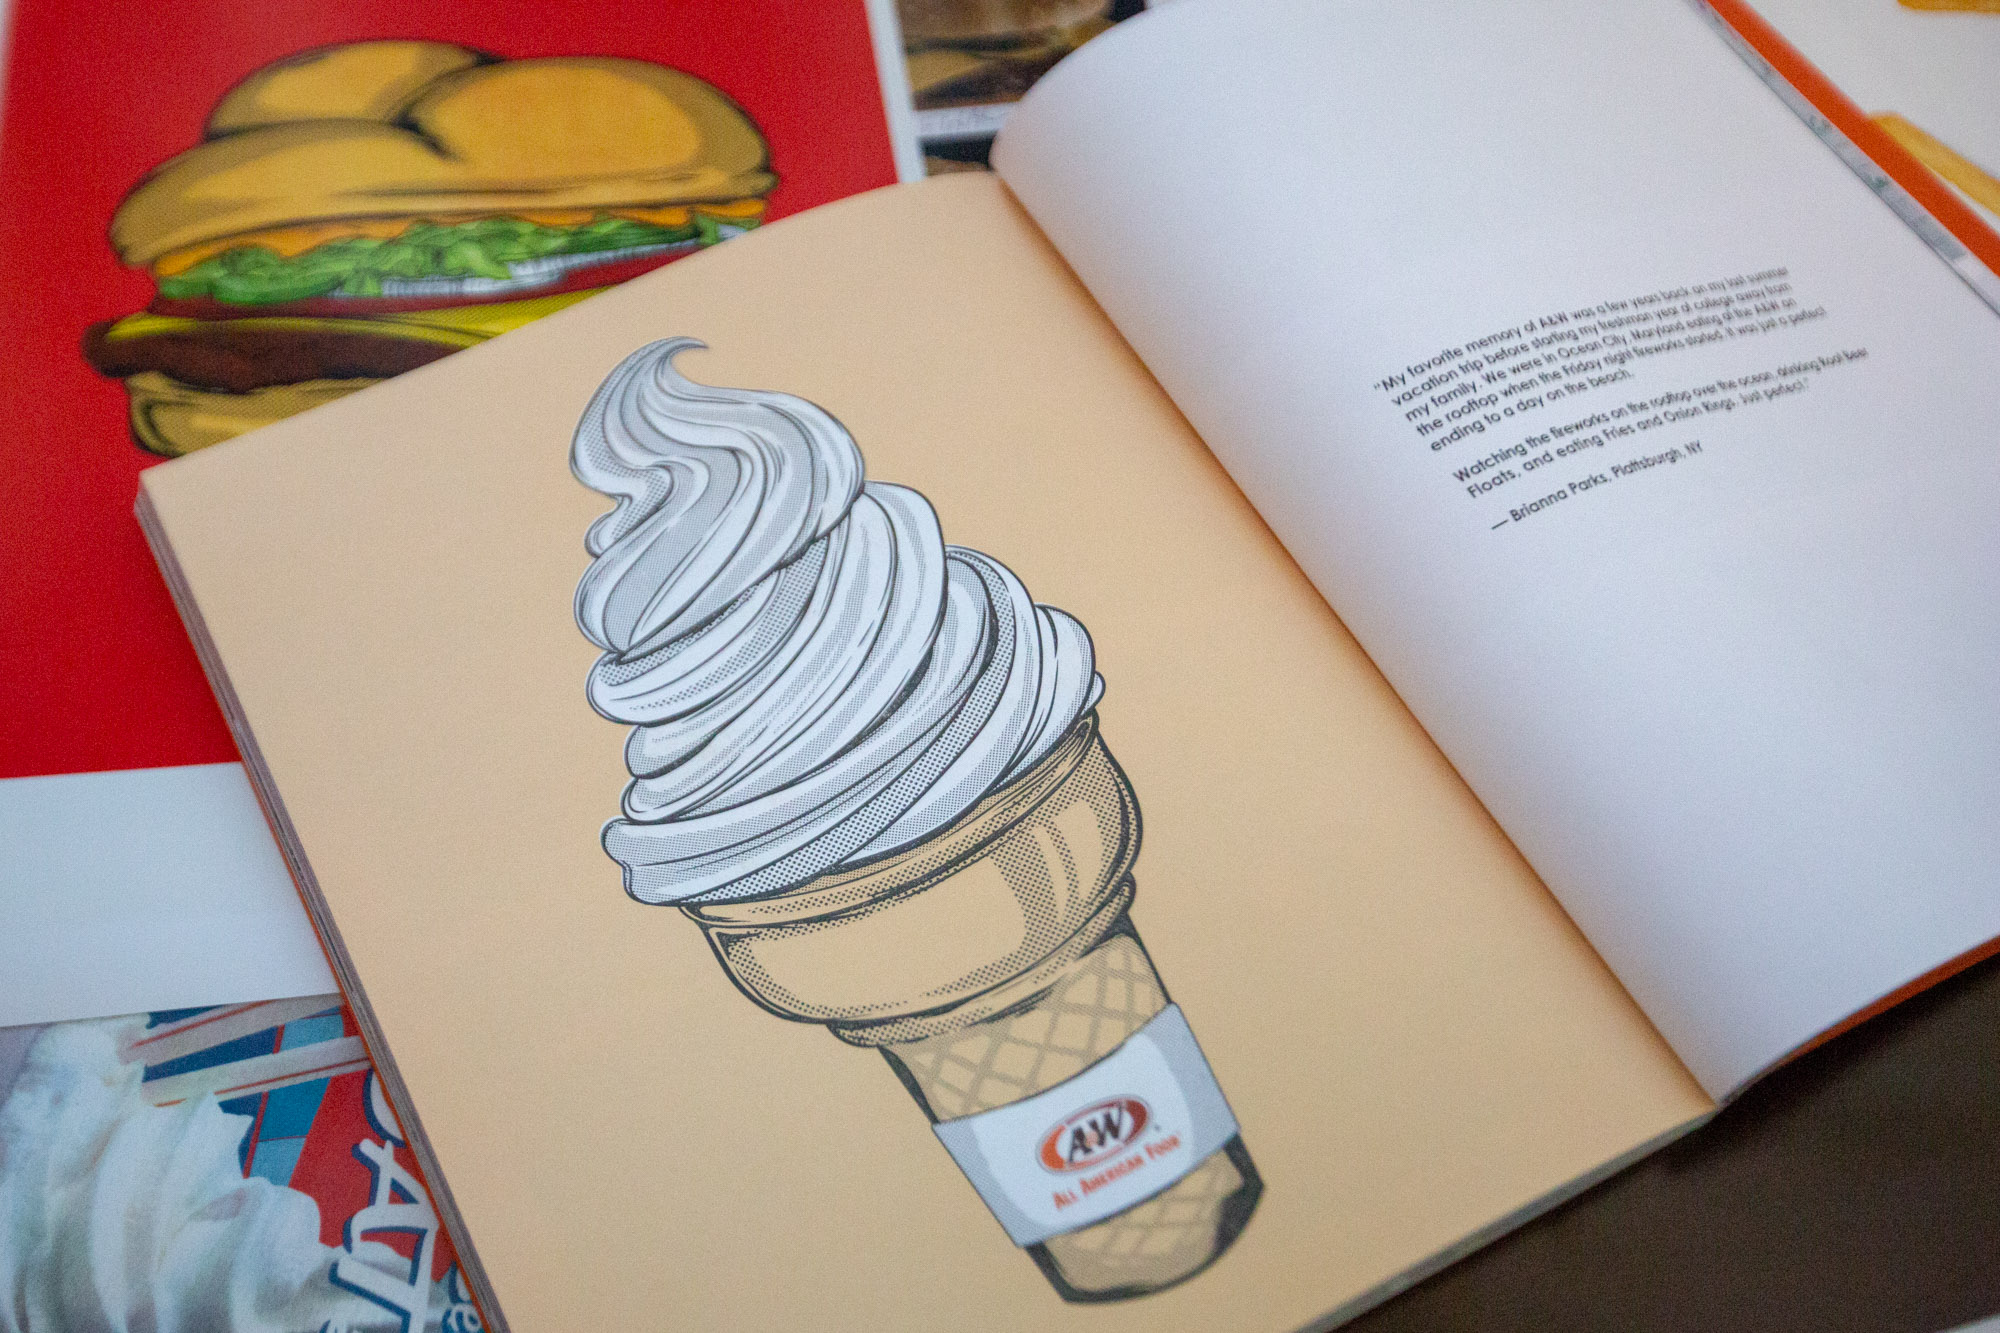 A&W 100th Anniversary Book with drawing of a vanilla soft serve cone on the left page, fan story on the right page.